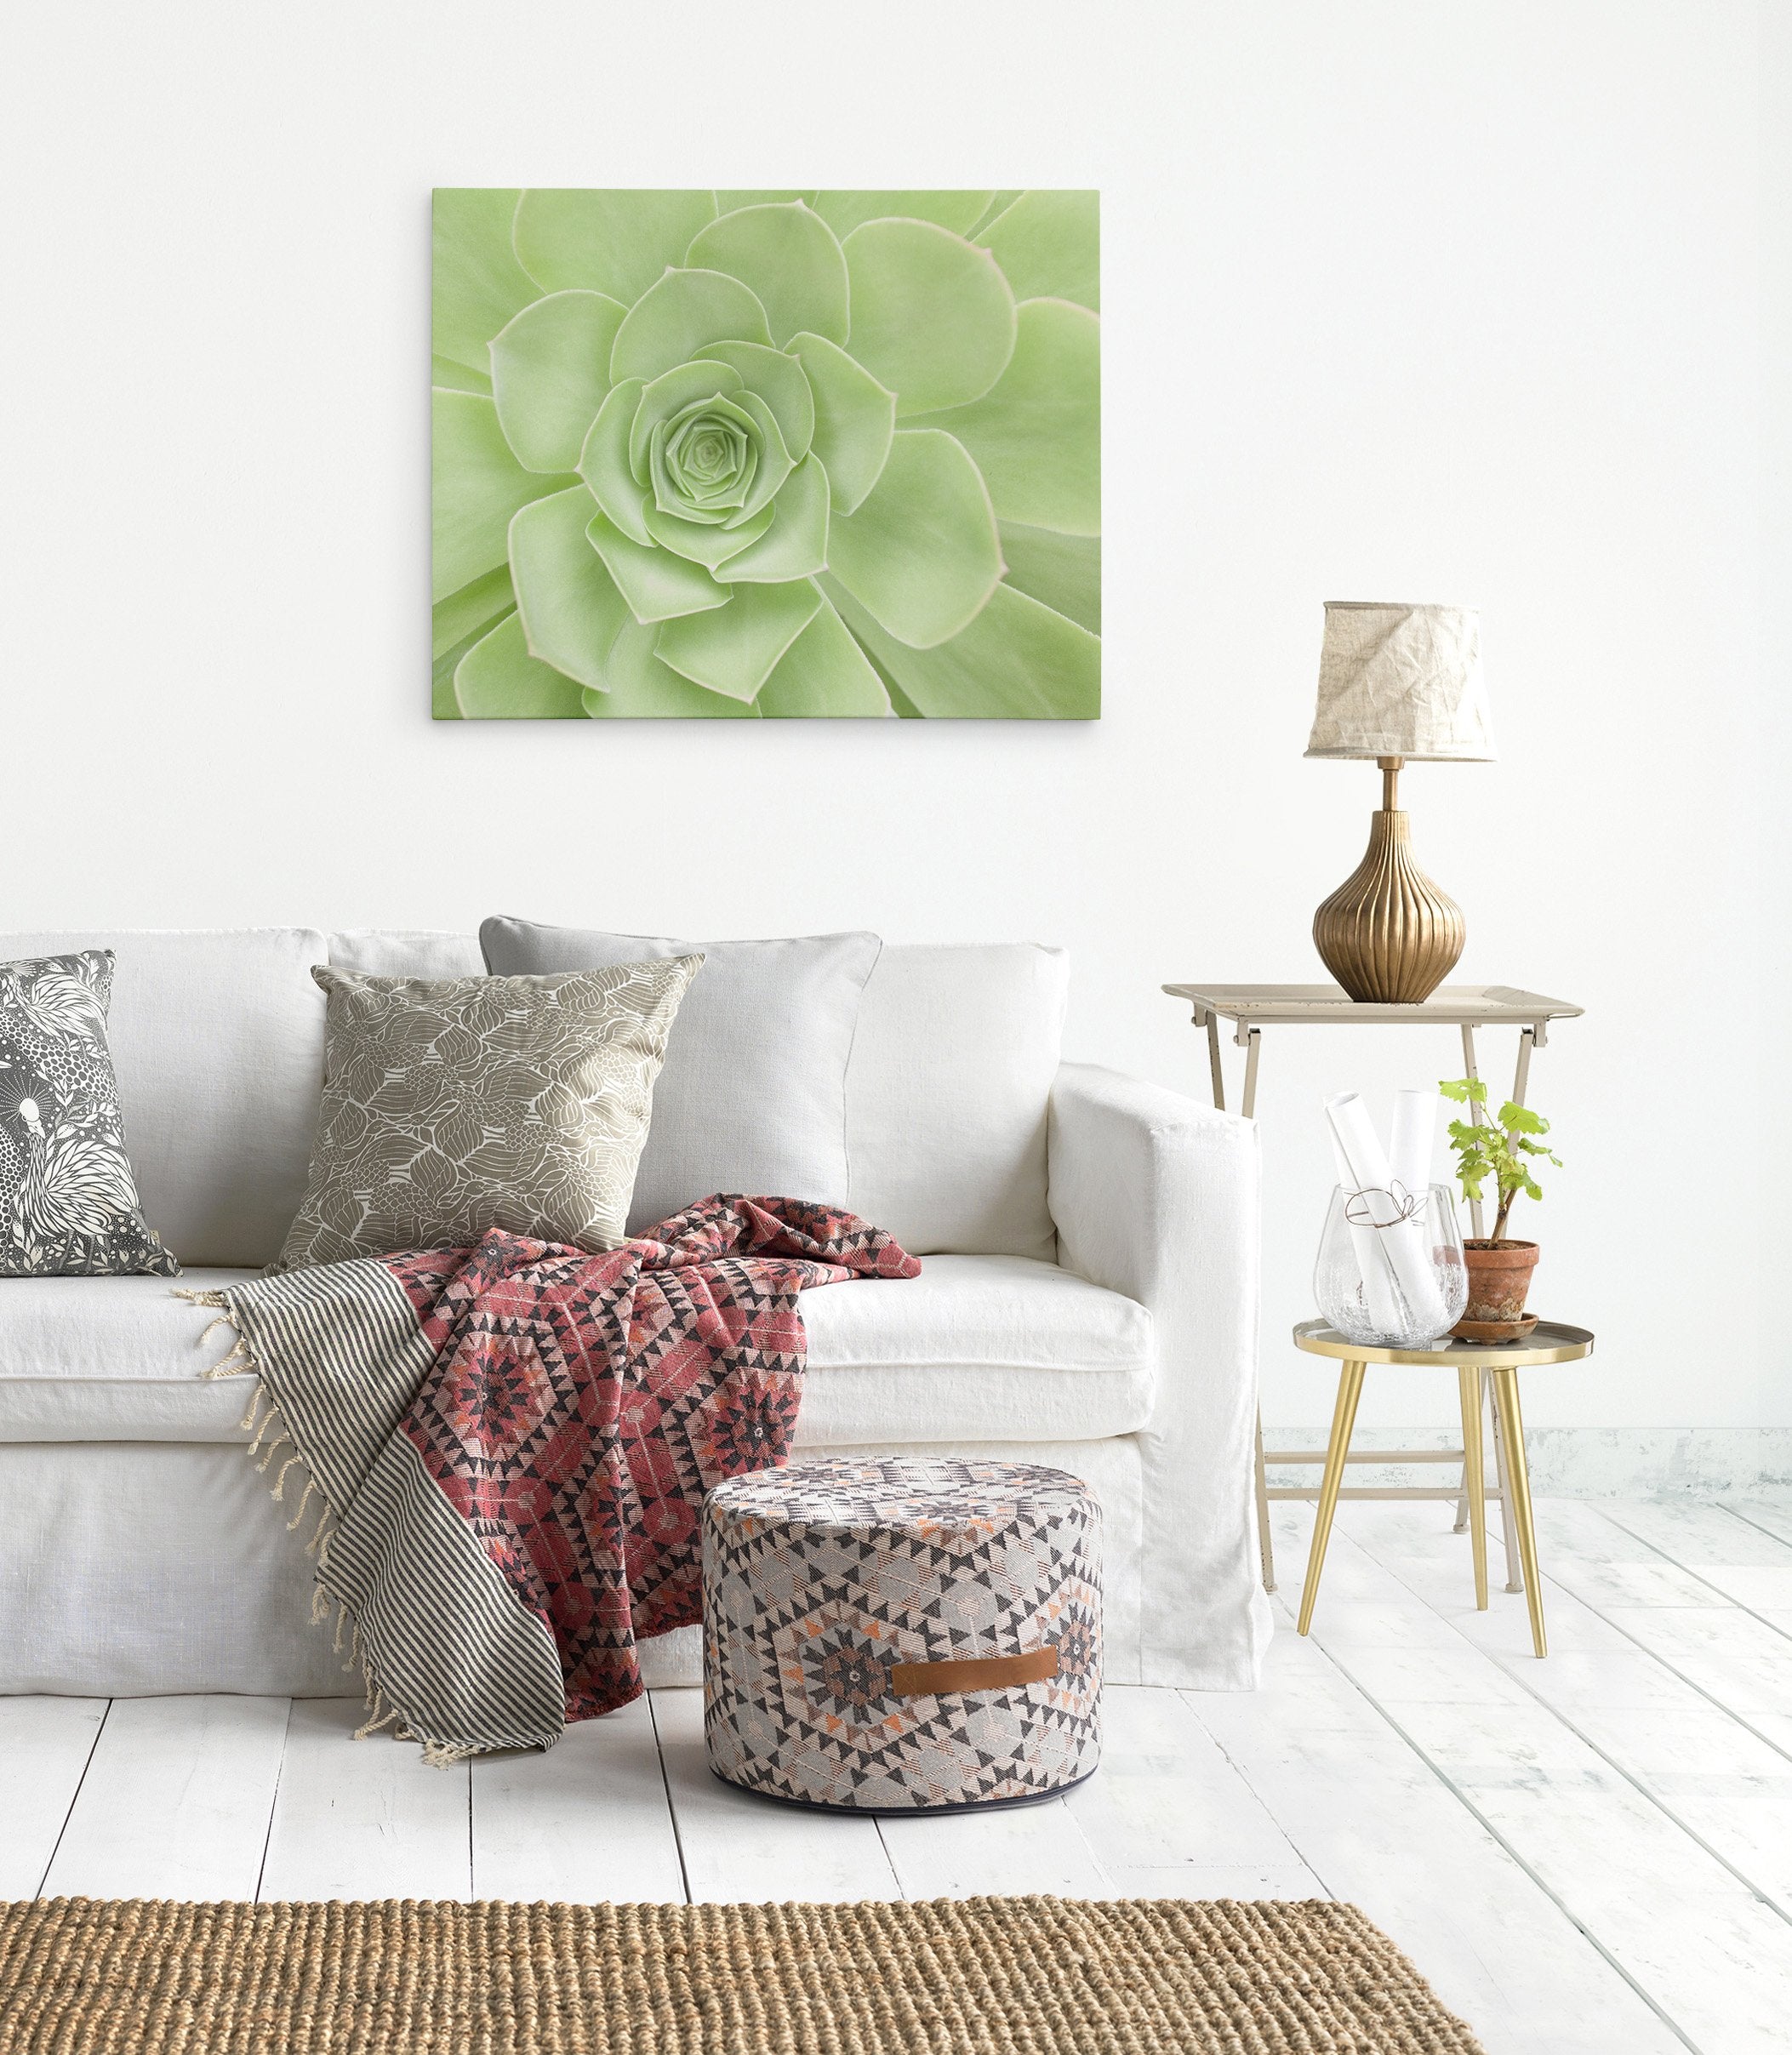 Green canvas wall art in a living room featuring a succulent plant